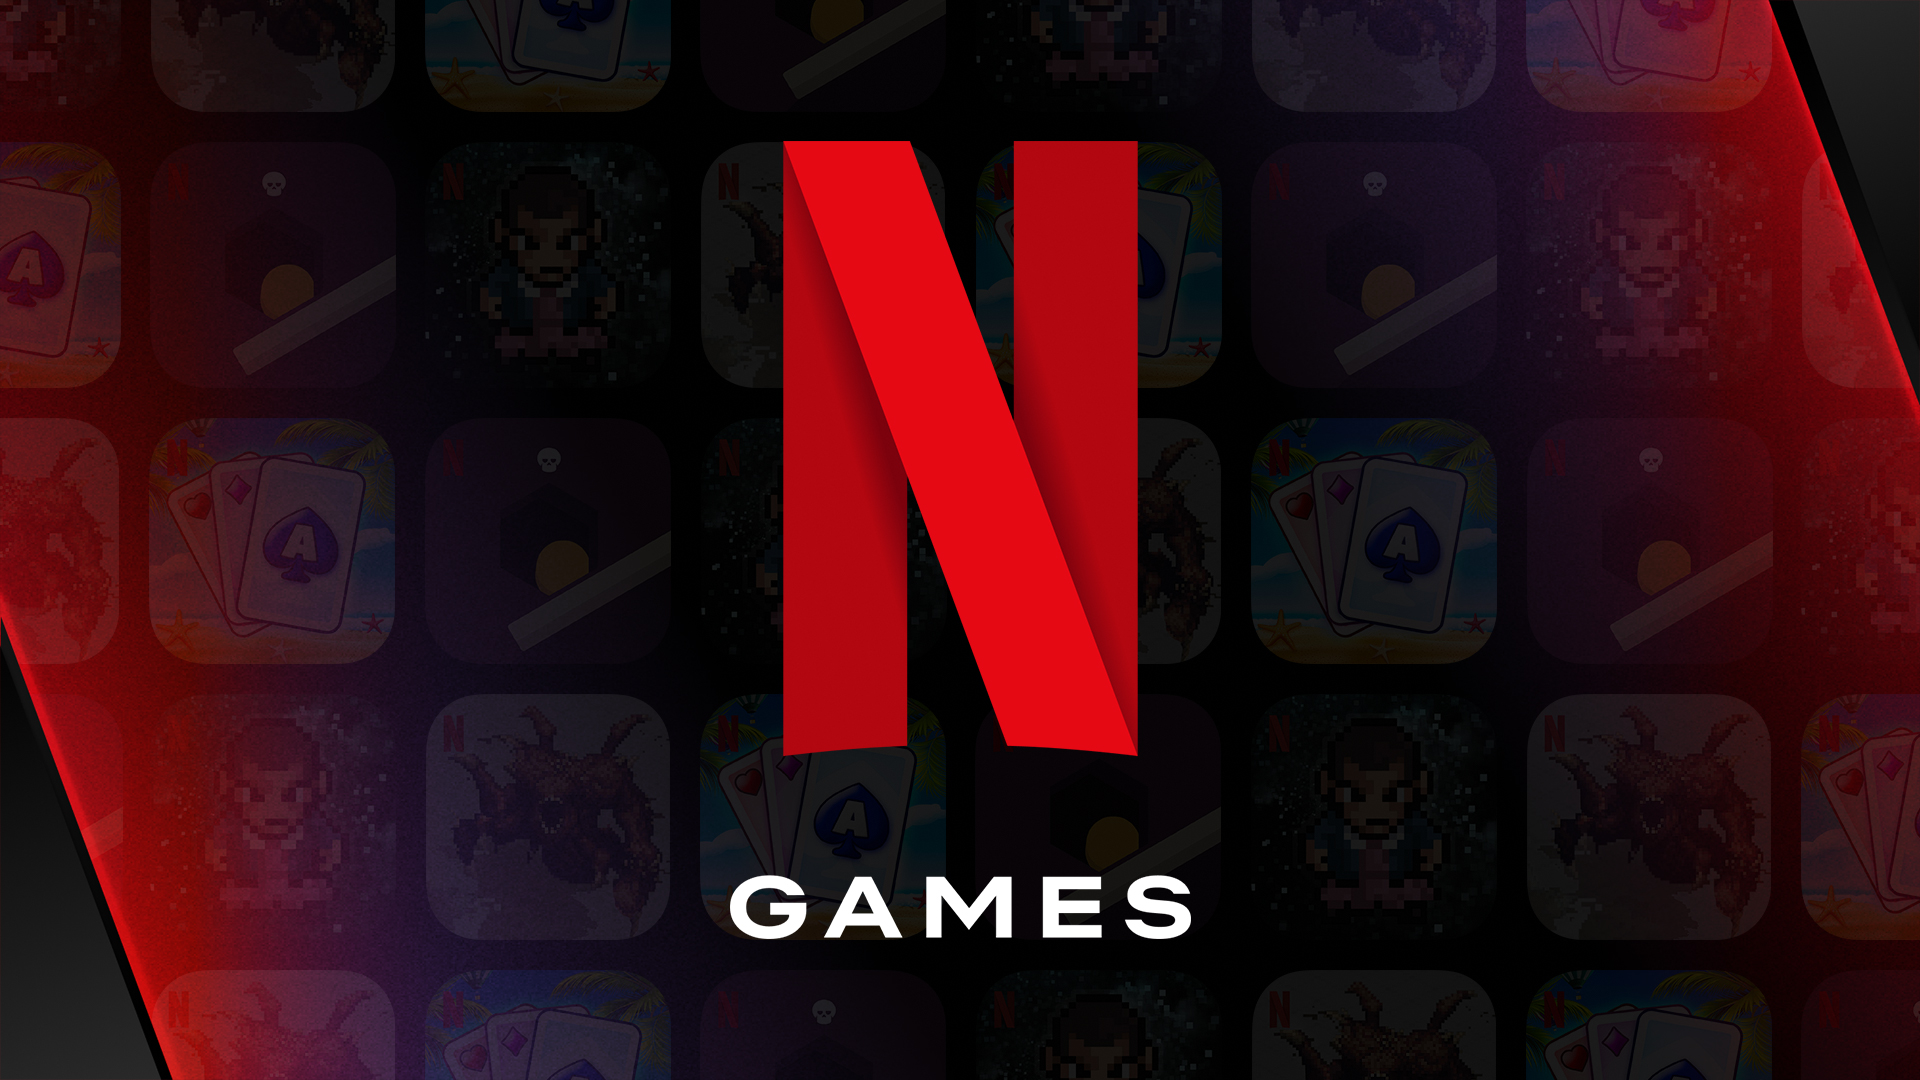 Netflix game app is now available to Android device users around the world